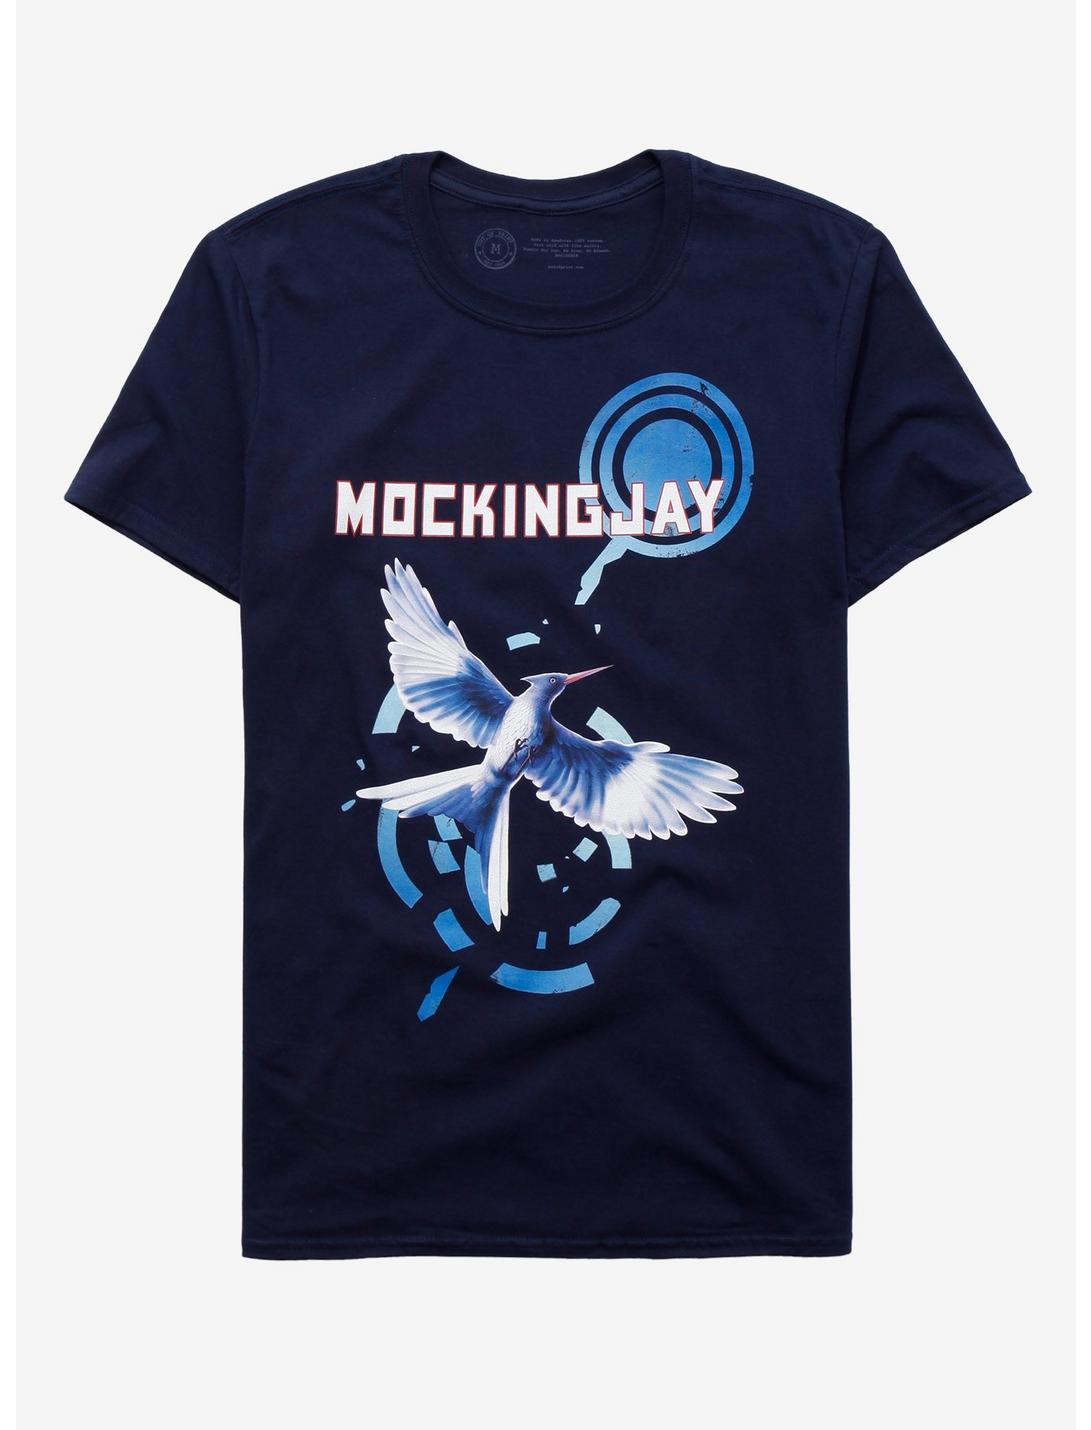 Suzanne Collins Mockingjay Book Cover T-Shirt, NAVY, hi-res